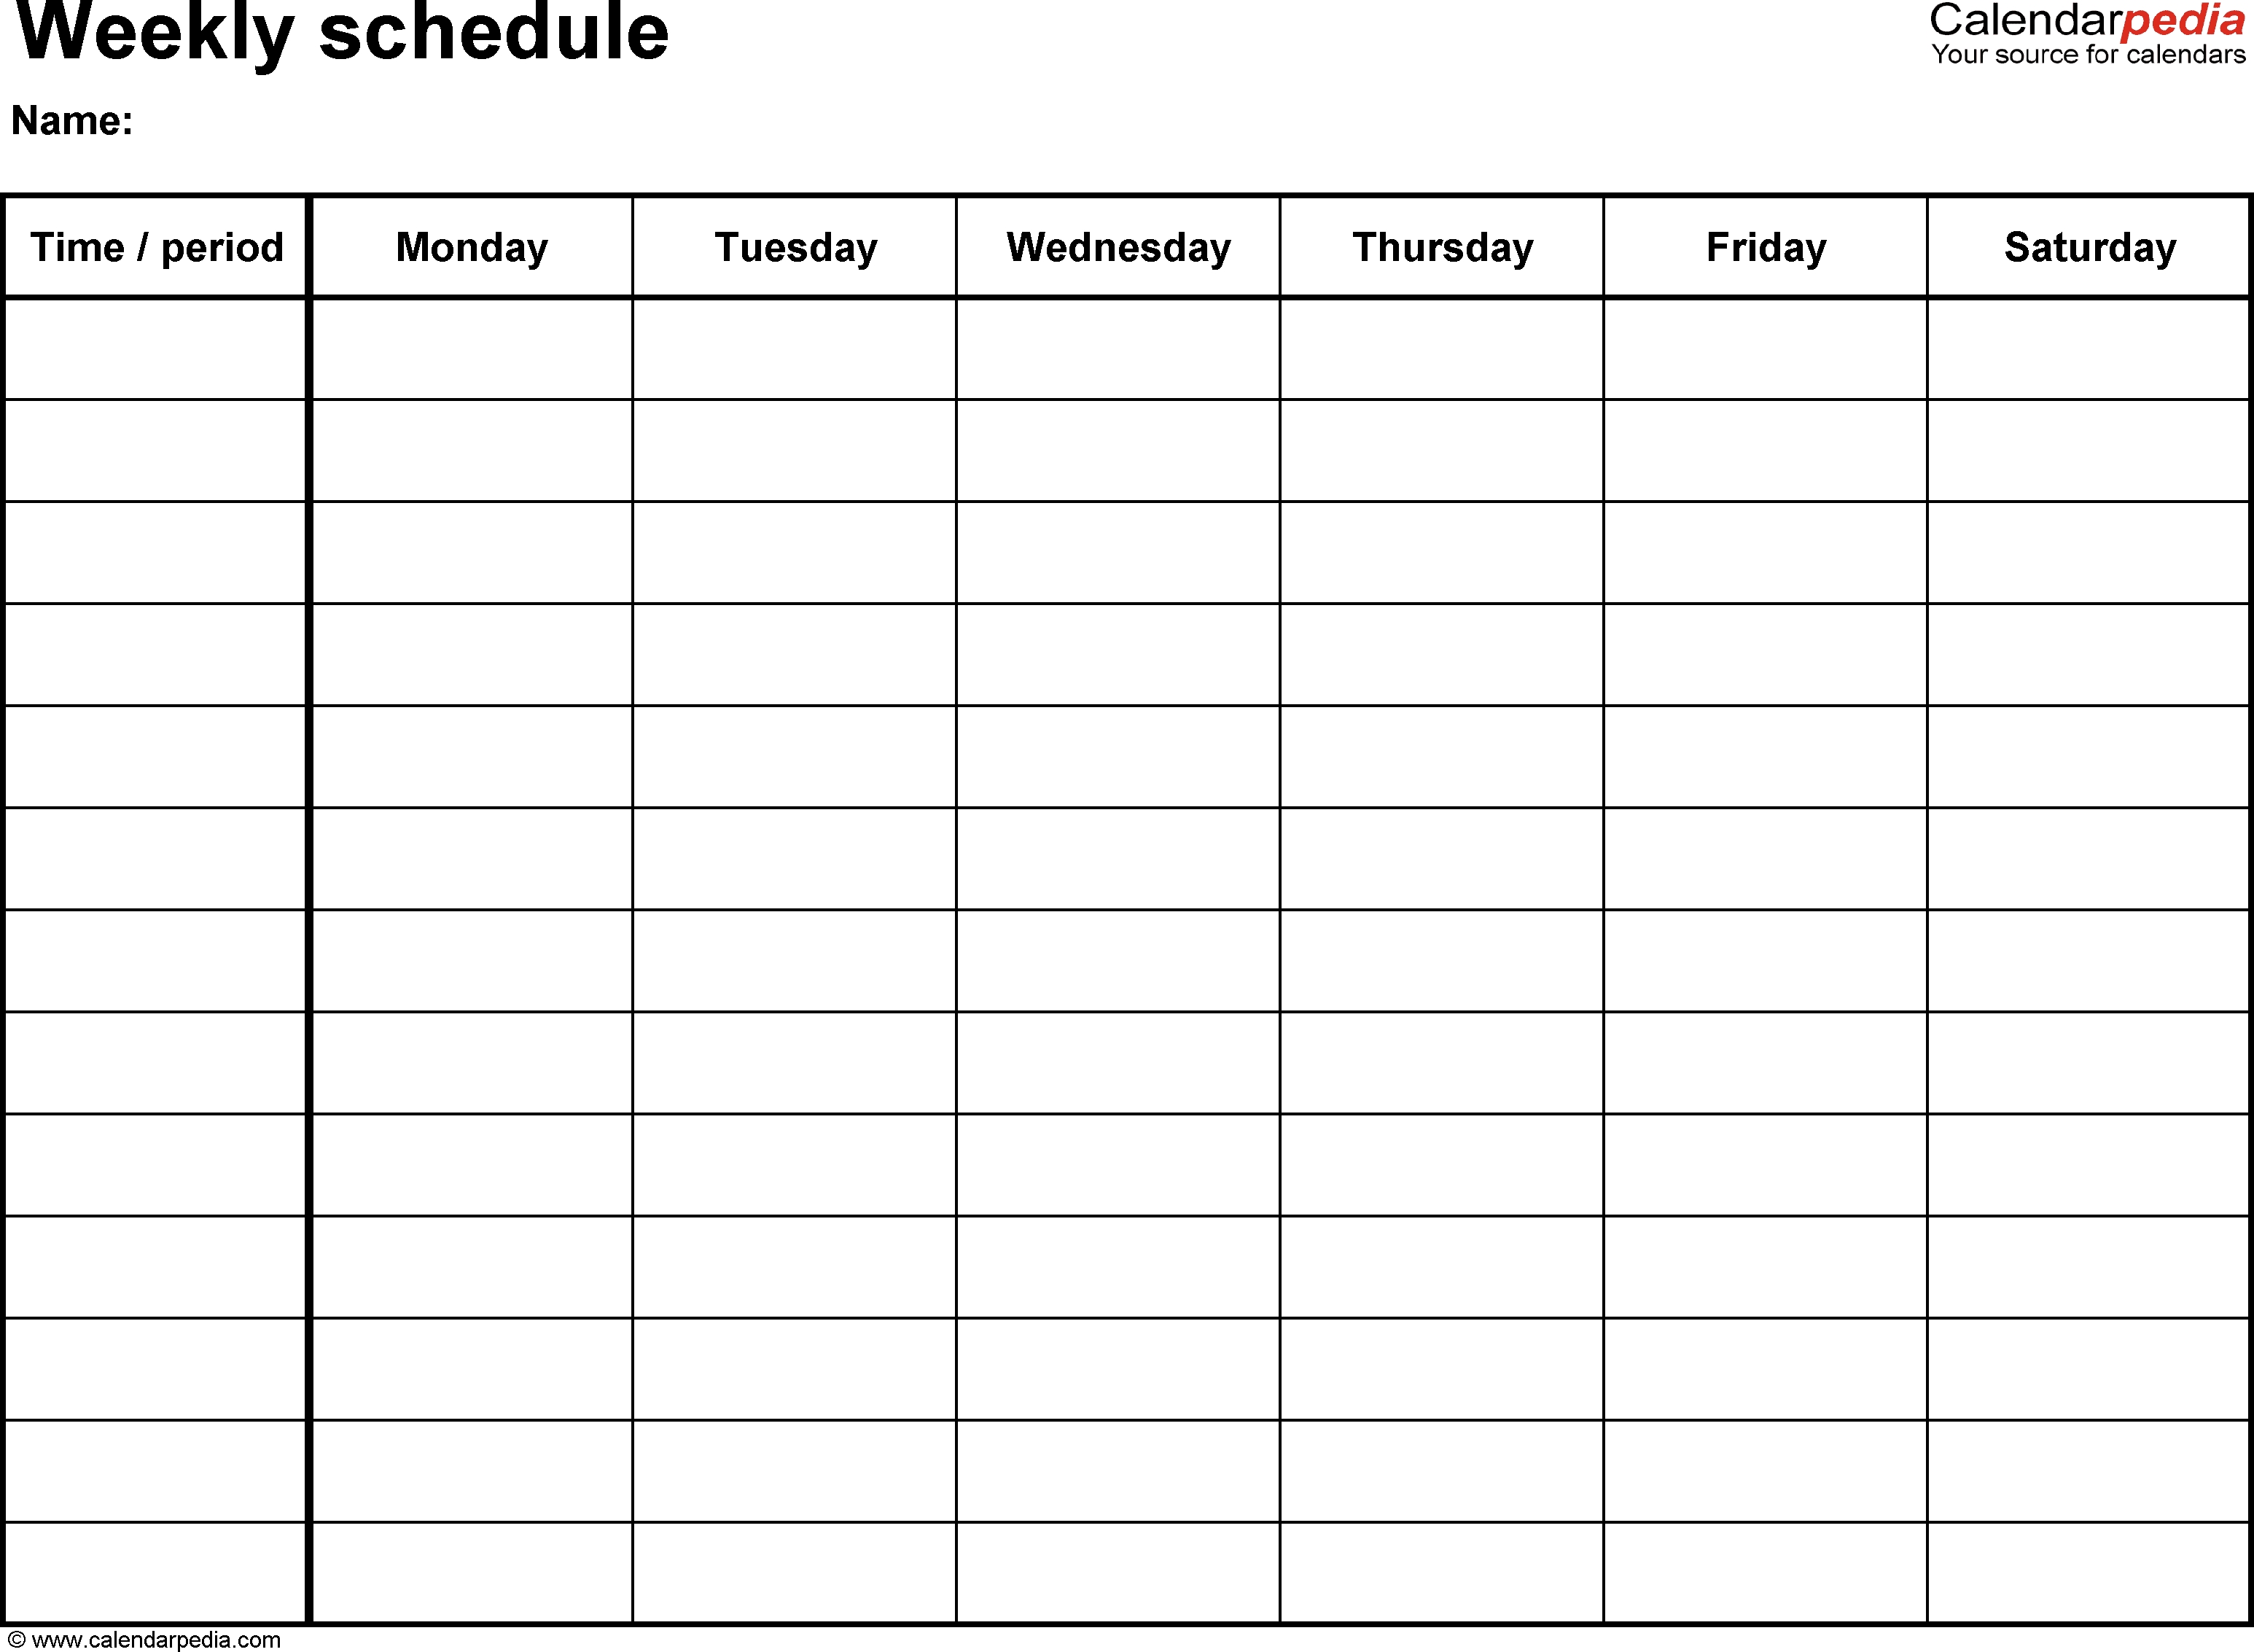 Free Weekly Schedule Templates For Pdf - 18 Templates for Blank Calendar Mon Through Fri With No Dates Or Month